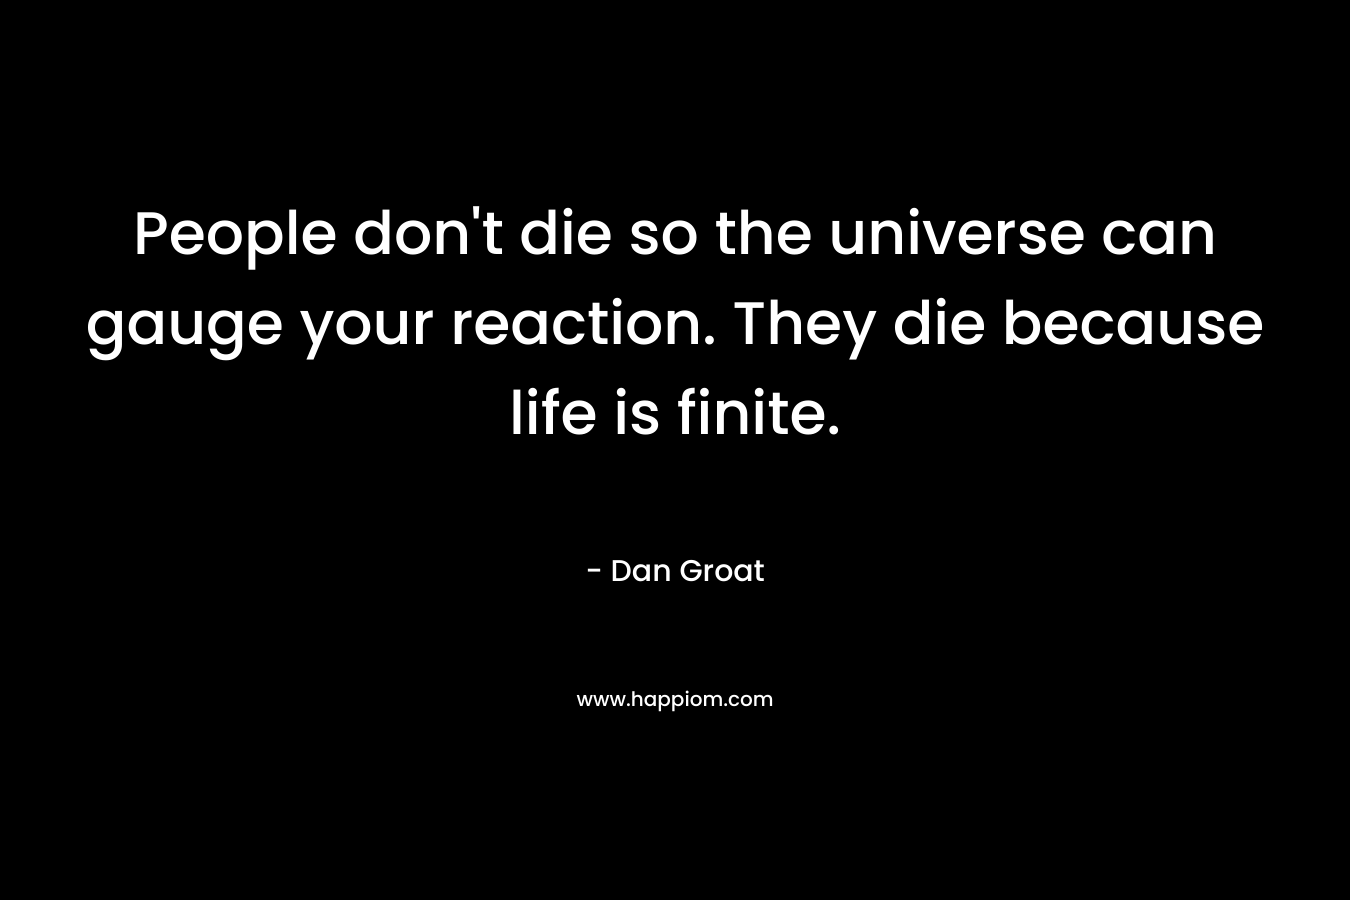 People don’t die so the universe can gauge your reaction. They die because life is finite. – Dan Groat